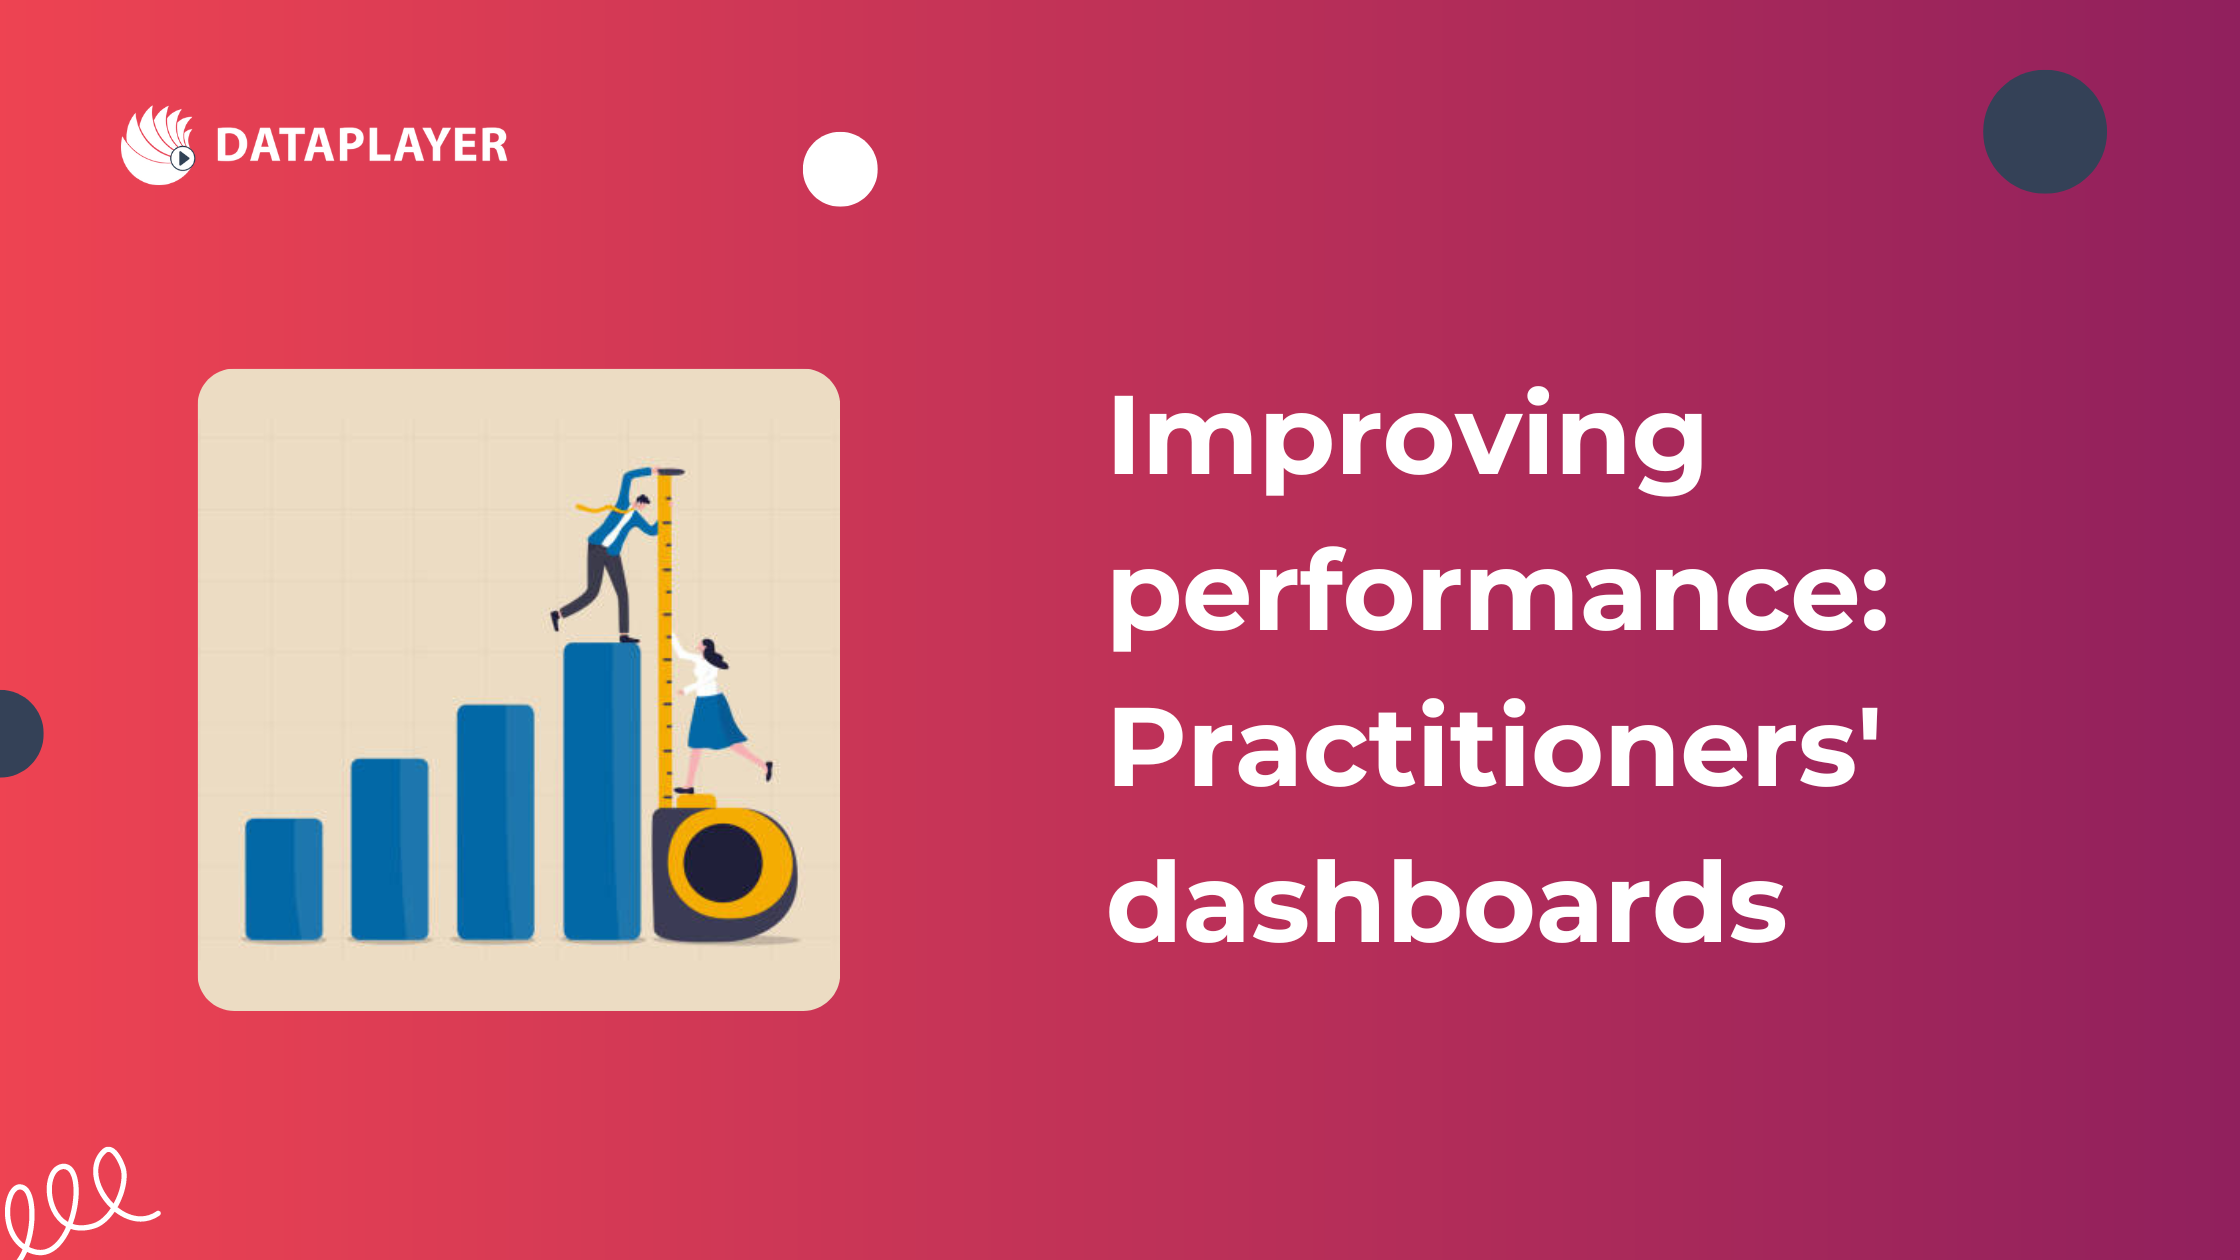 Improving performance: Practitioners’ dashboards